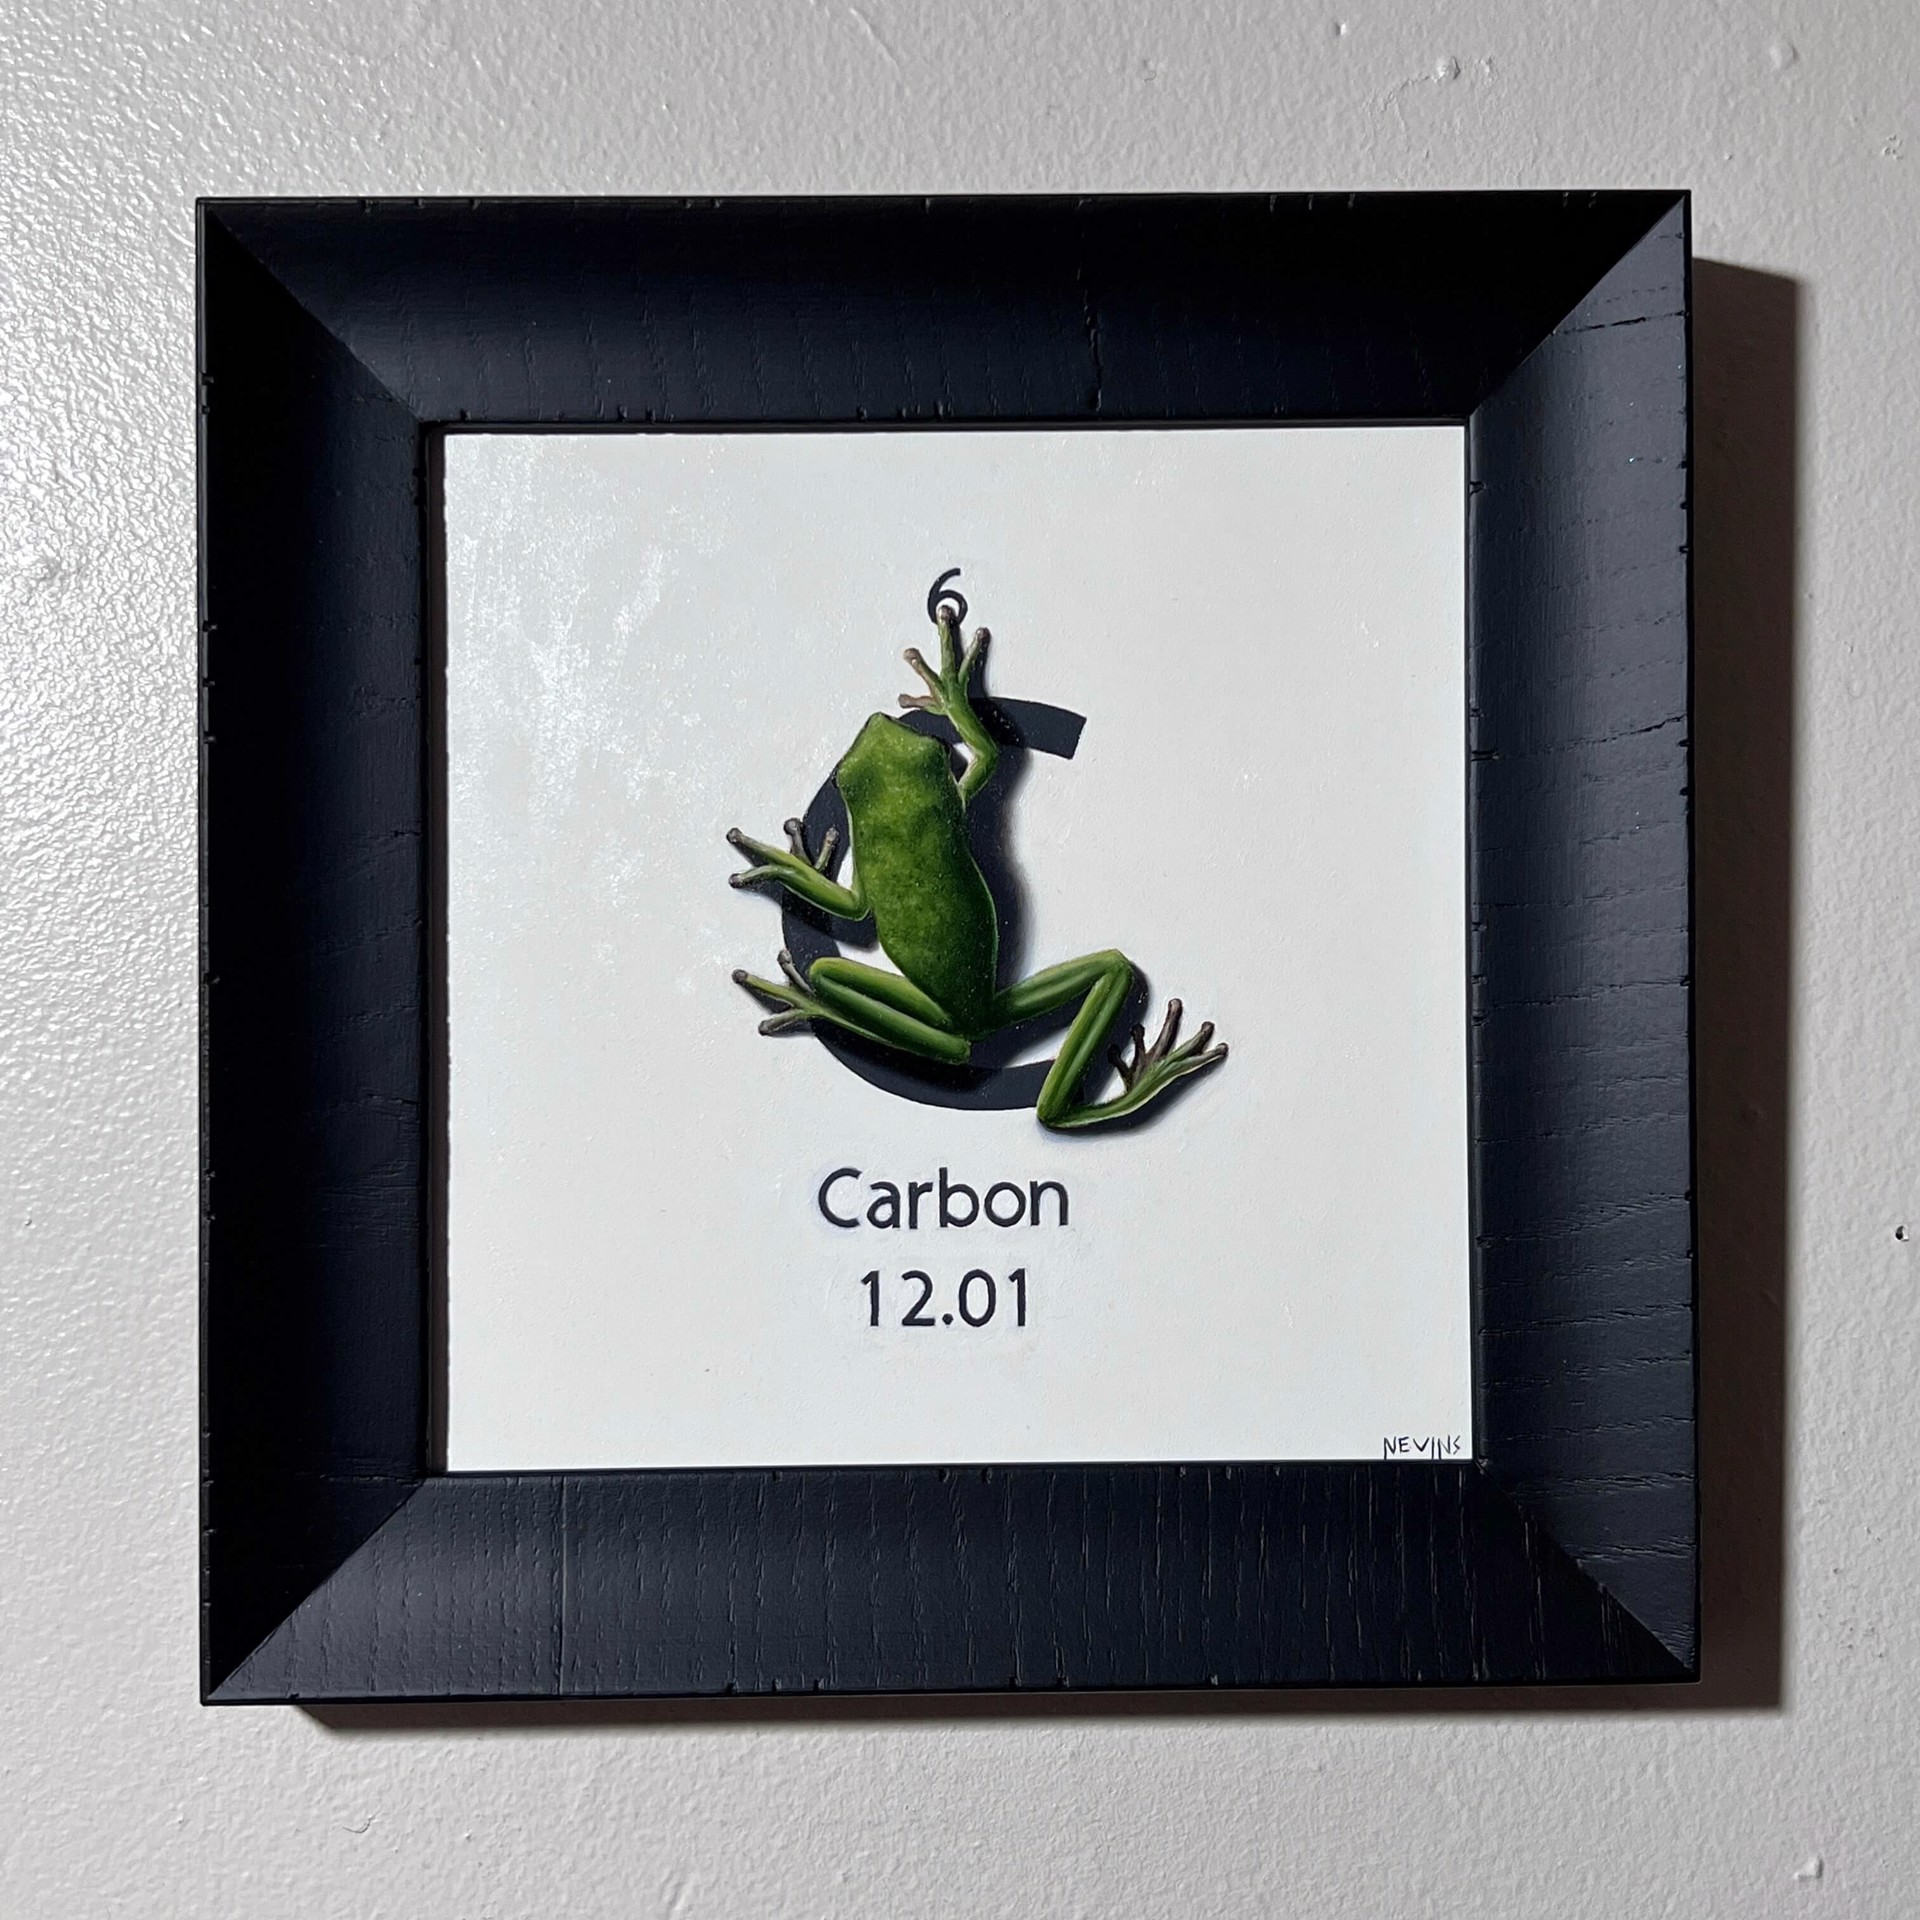 Carbon by Patrick Nevins